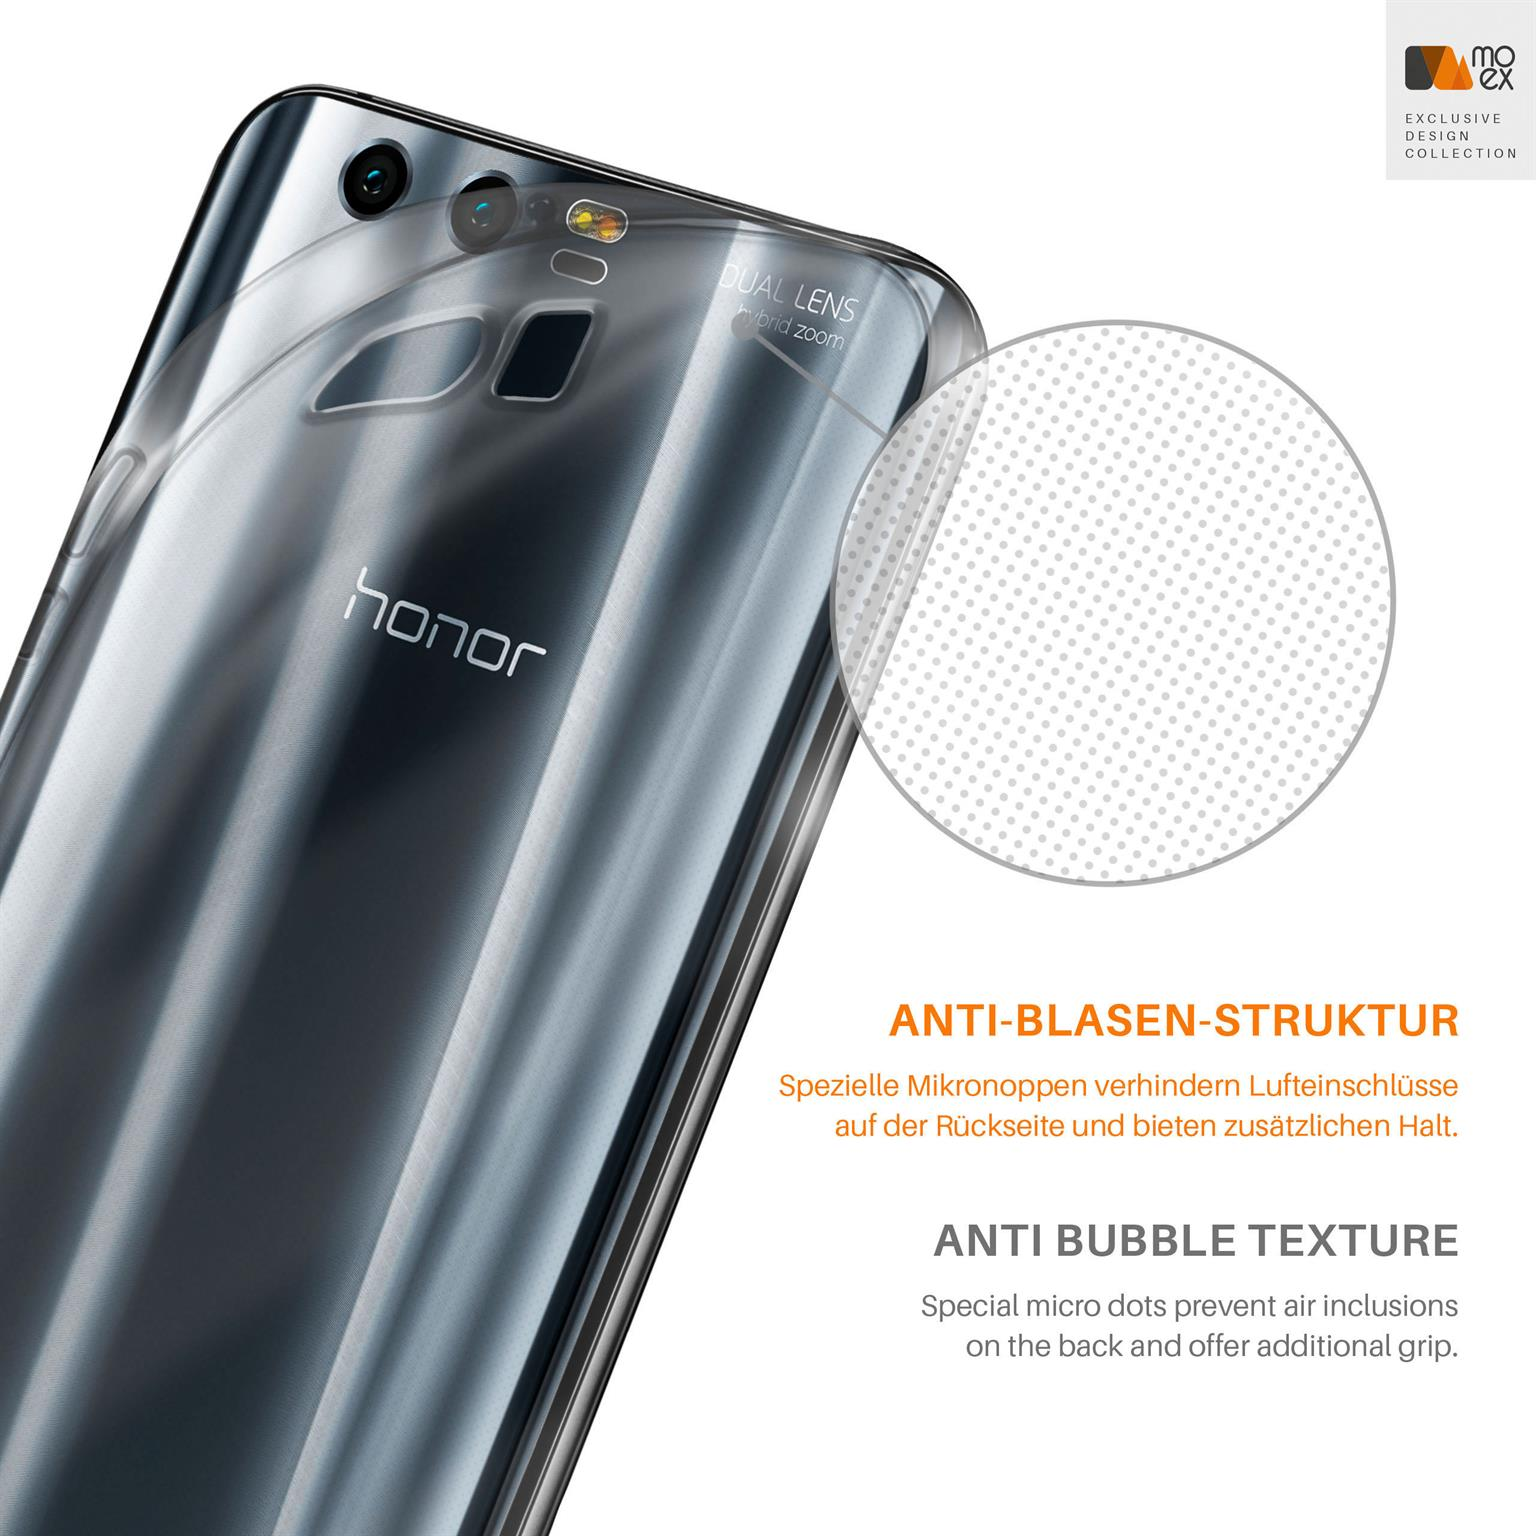 Backcover, 9, Aero Huawei, Crystal-Clear Case, MOEX Honor